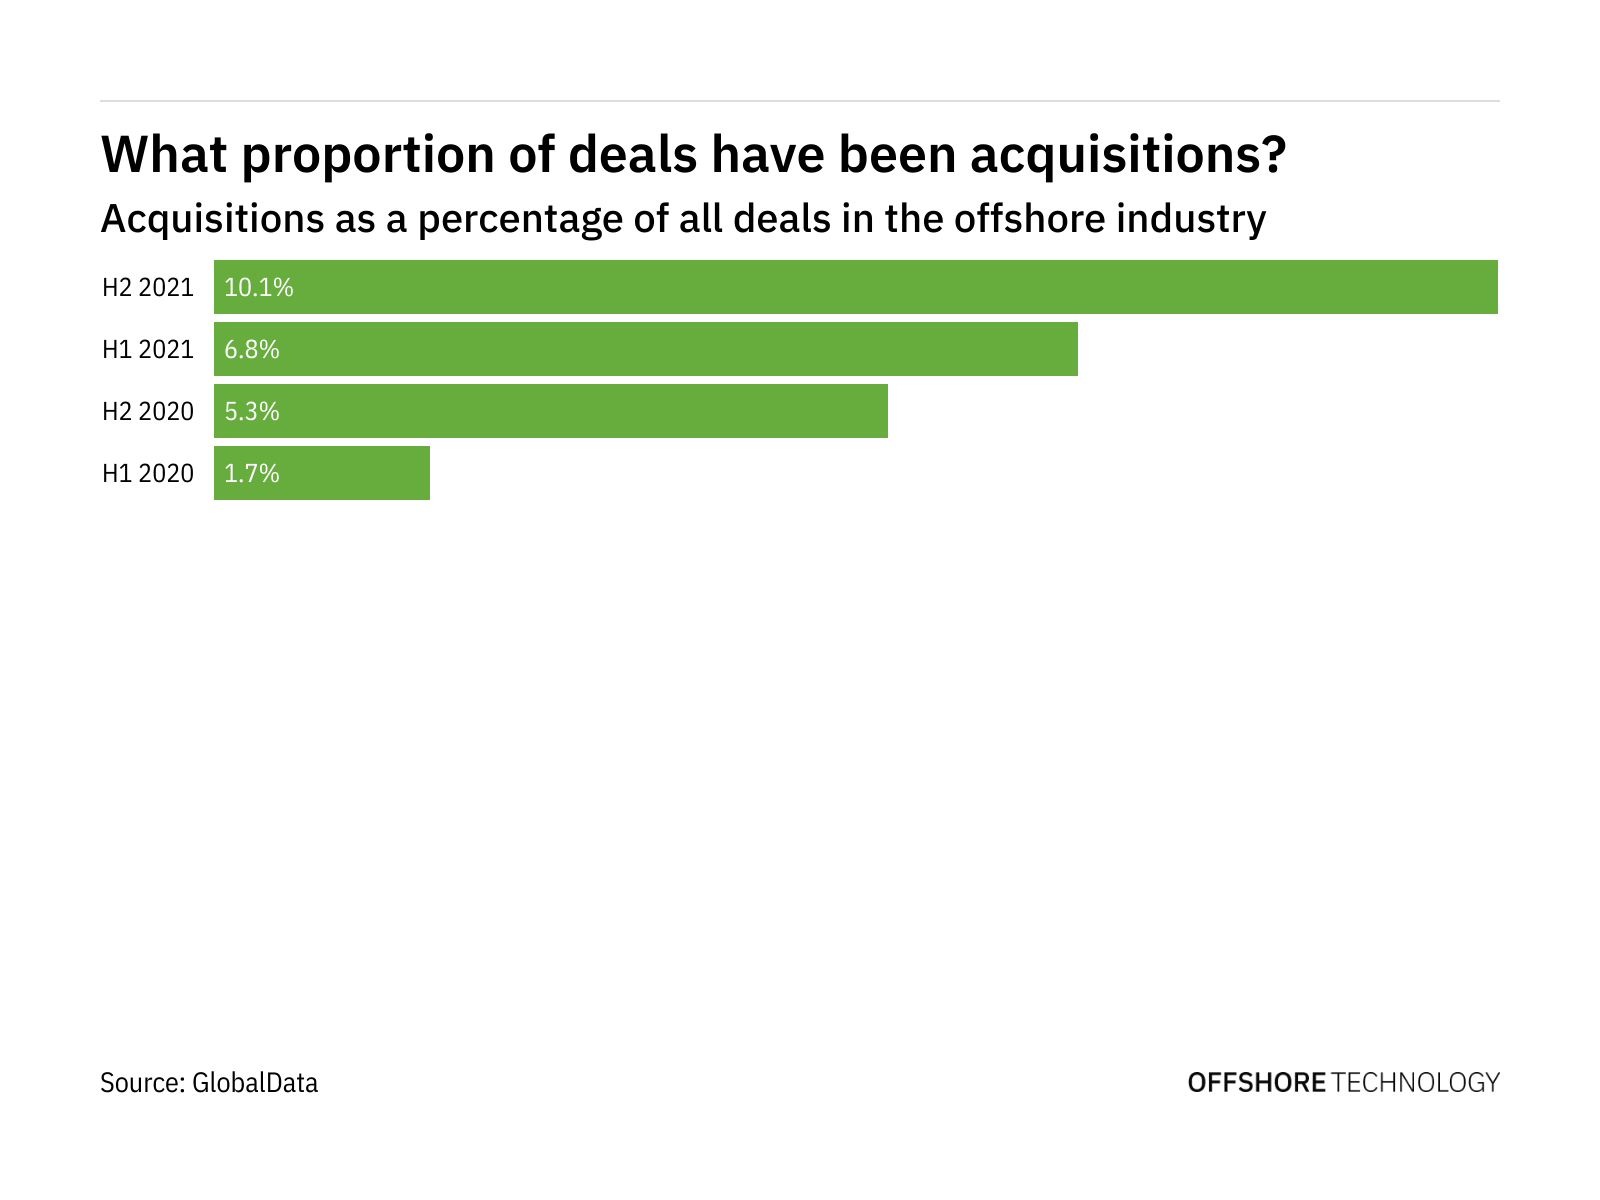 Acquisitions increased significantly in the offshore industry in H2 2021